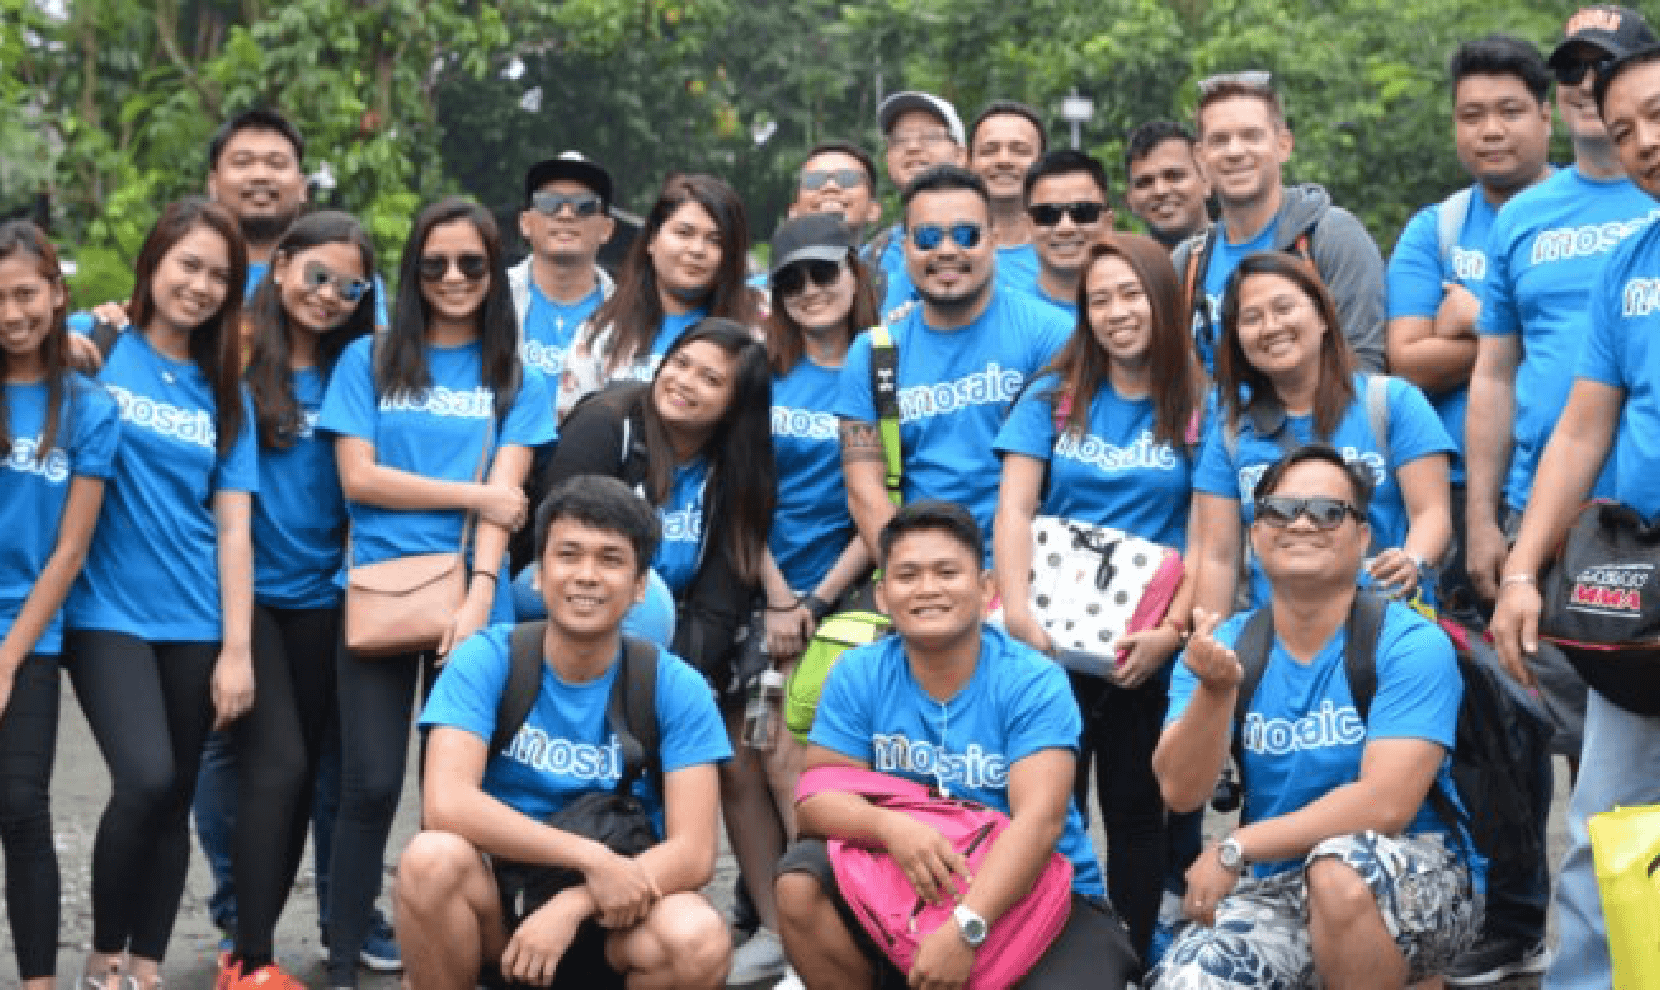 mosaic-a-management-platform-for-the-fb-industry-in-the-philippines-raises-1-million-in-series-a